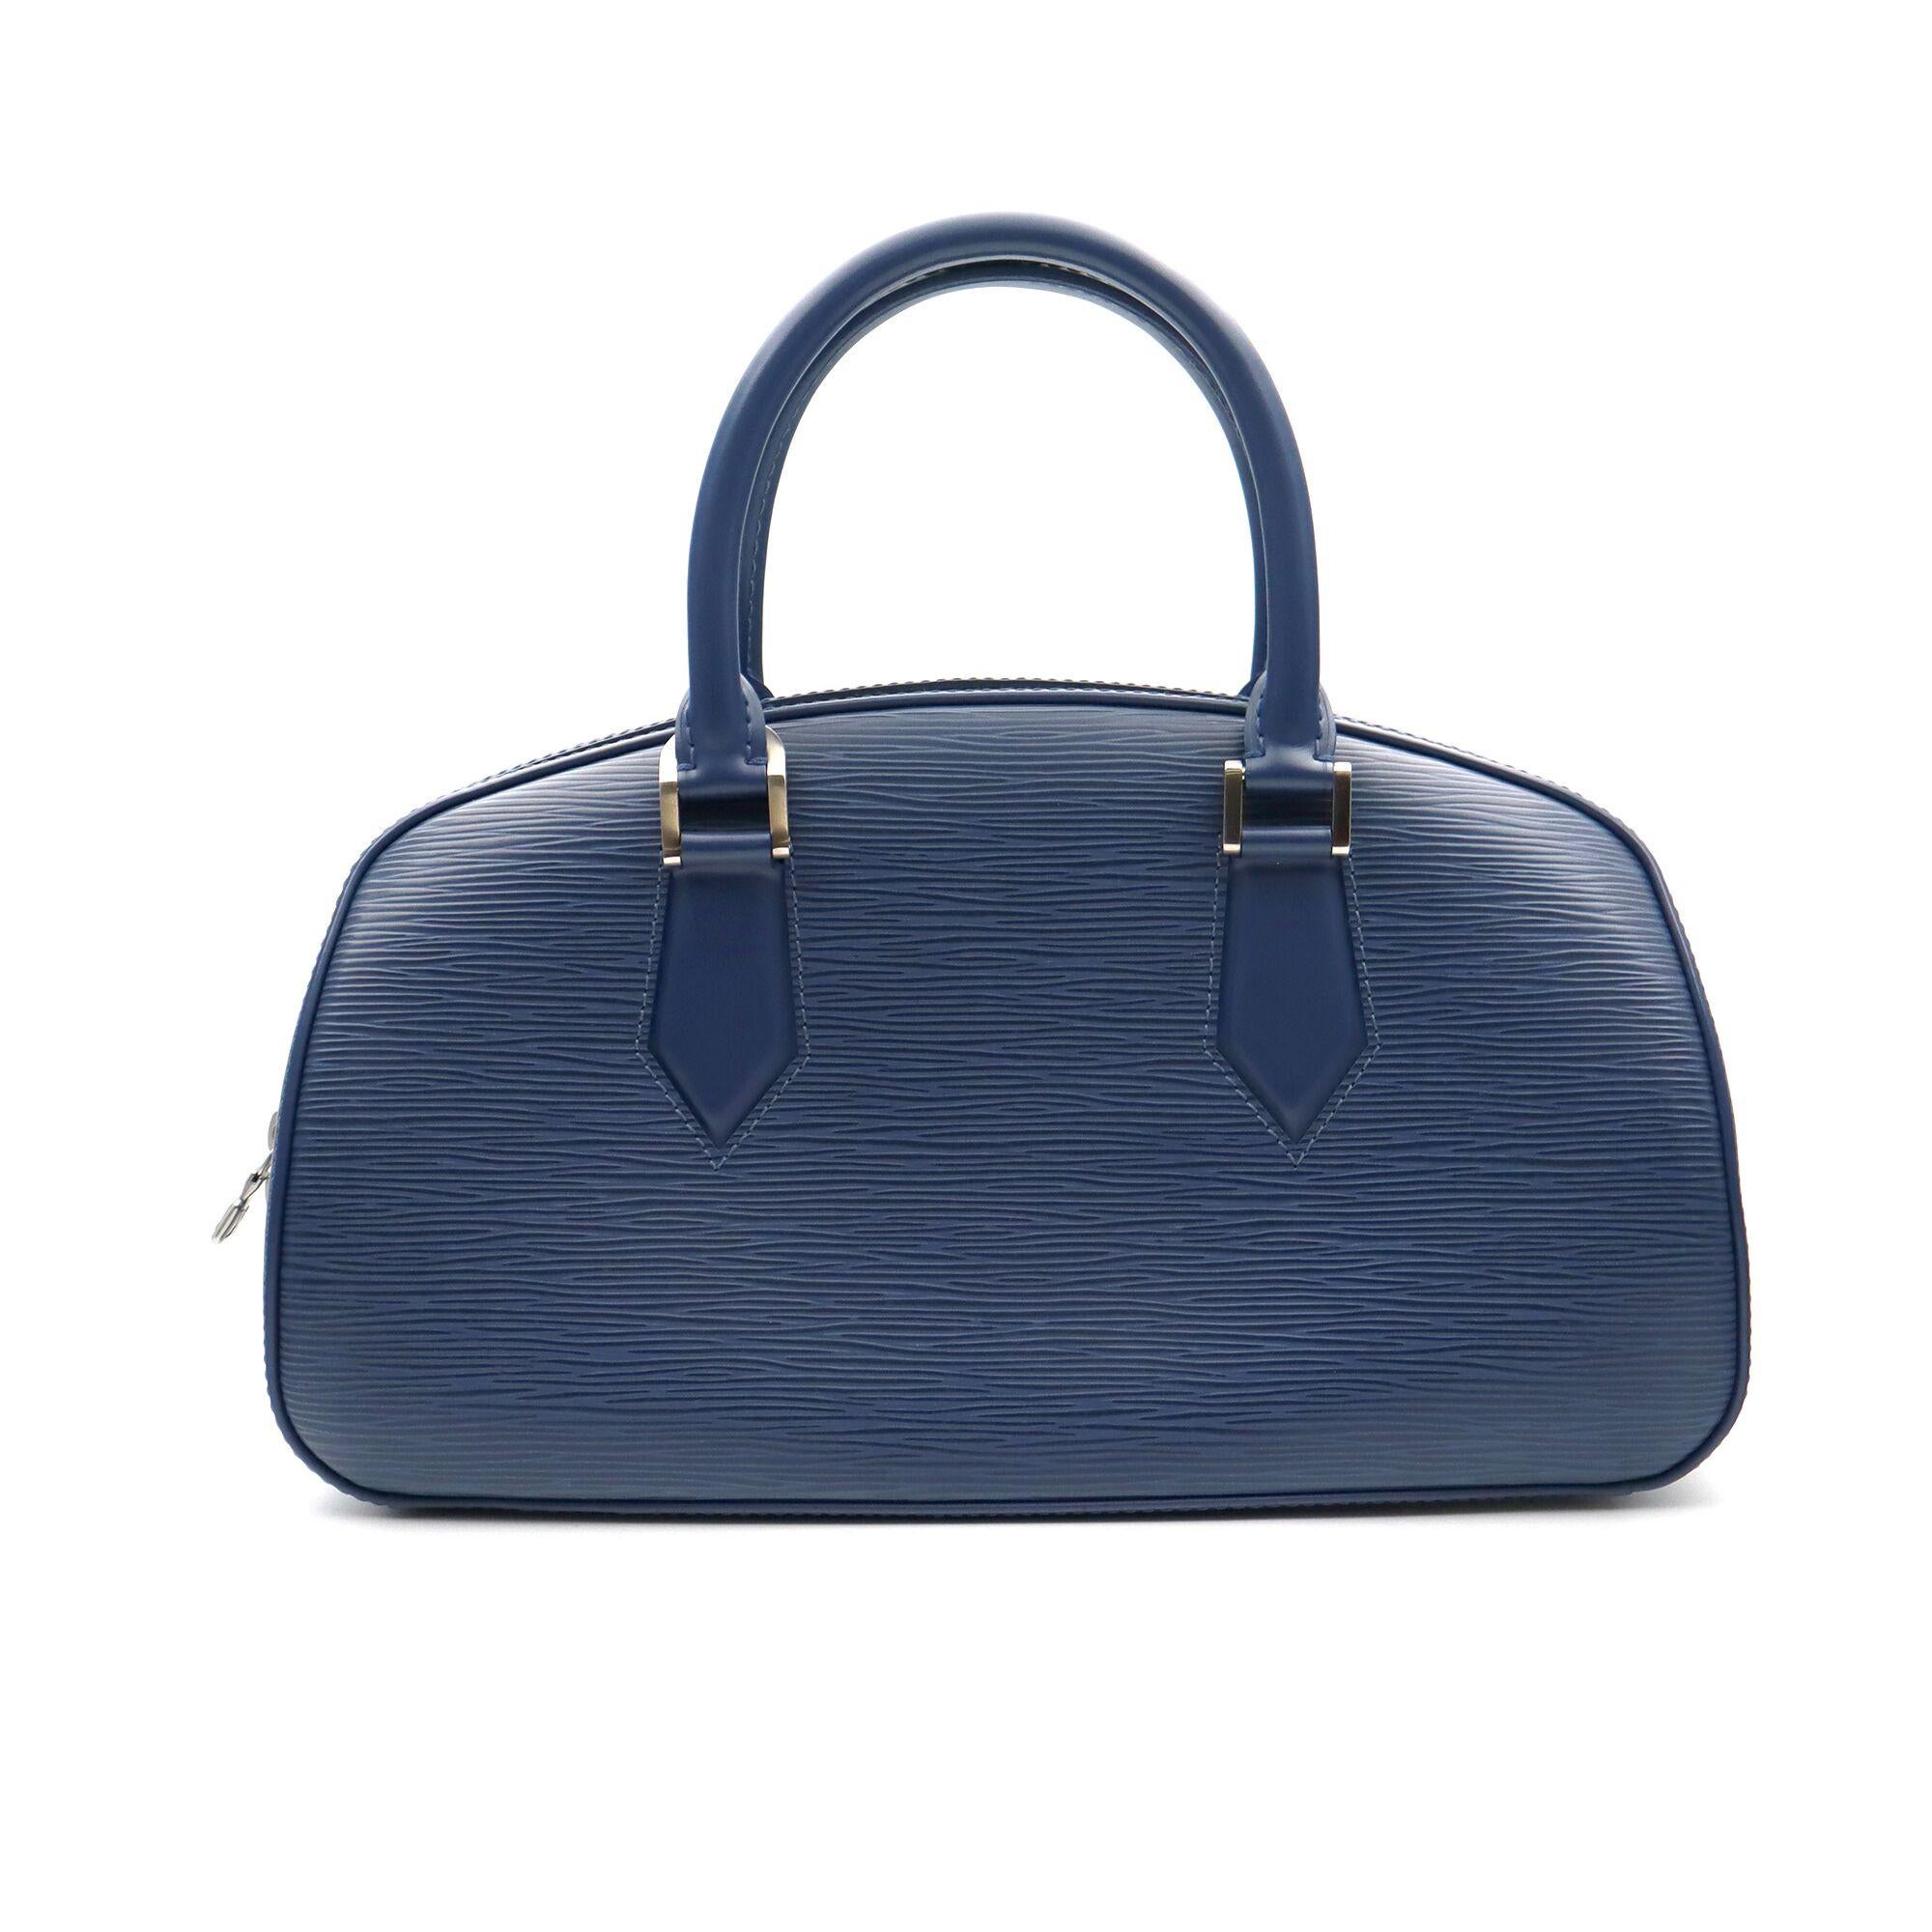 Louis Vuitton Jasmin in blue Epi leather hobo bag. Simple and classy this design makes this bag very unique and stylish. This handheld bag is secured with a double zipper. Inside is in matching blue alkantra lining with one open interior pocket.